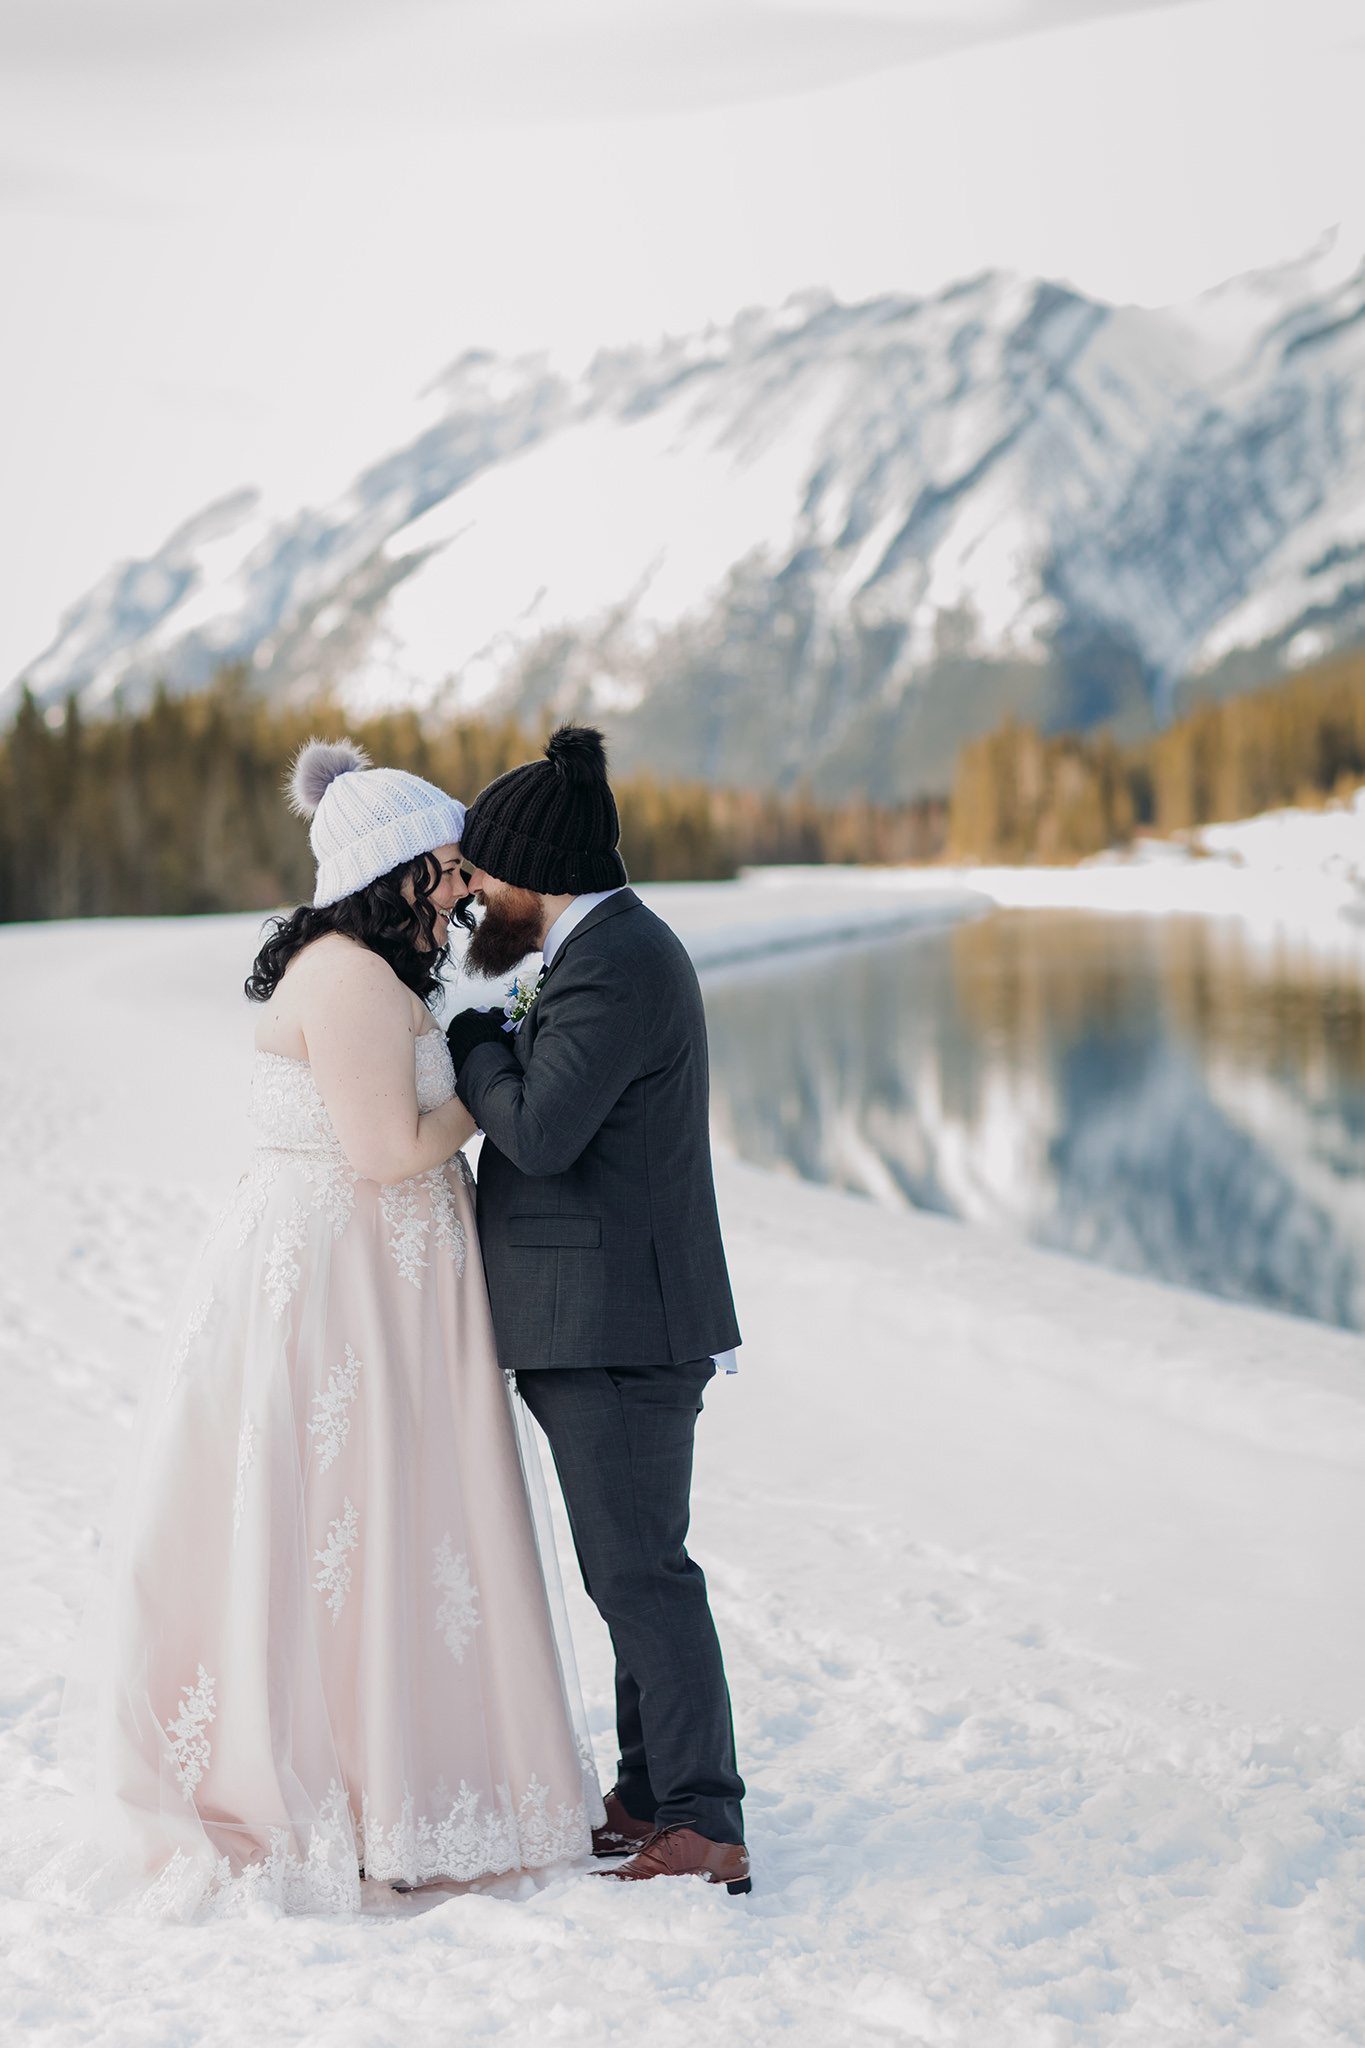 Falcon Crest Lodge wedding Canmore winter wedding photos bride & groom at Goat Pond in Kananaskis photographed by ENV Photography with hats mittens